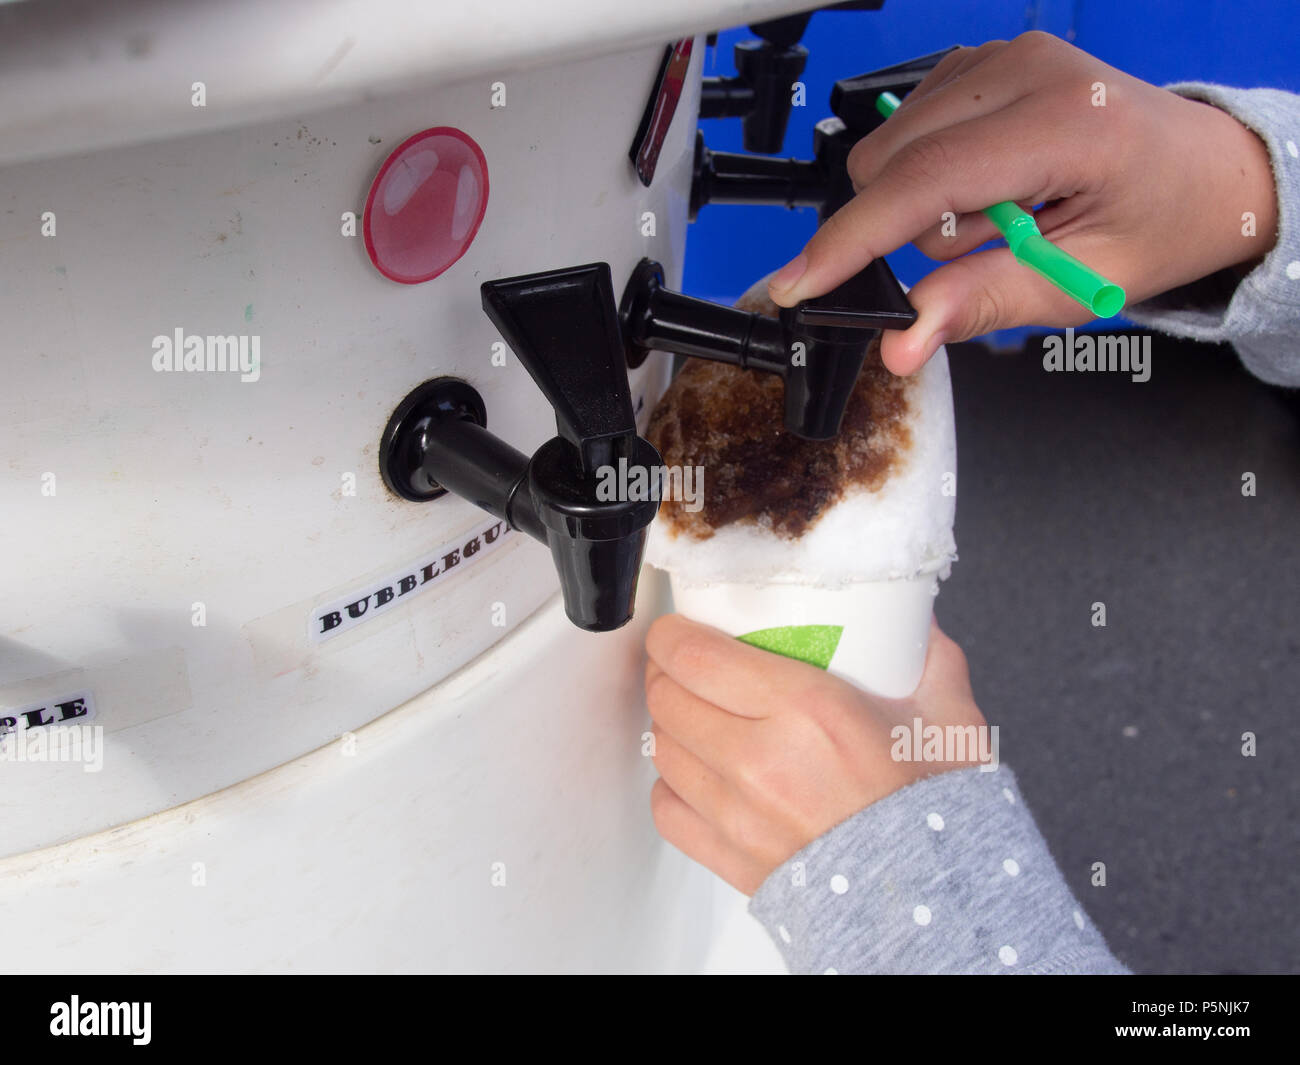 Child Putting Flavouring On A Cup of Shaved Ice Stock Photo